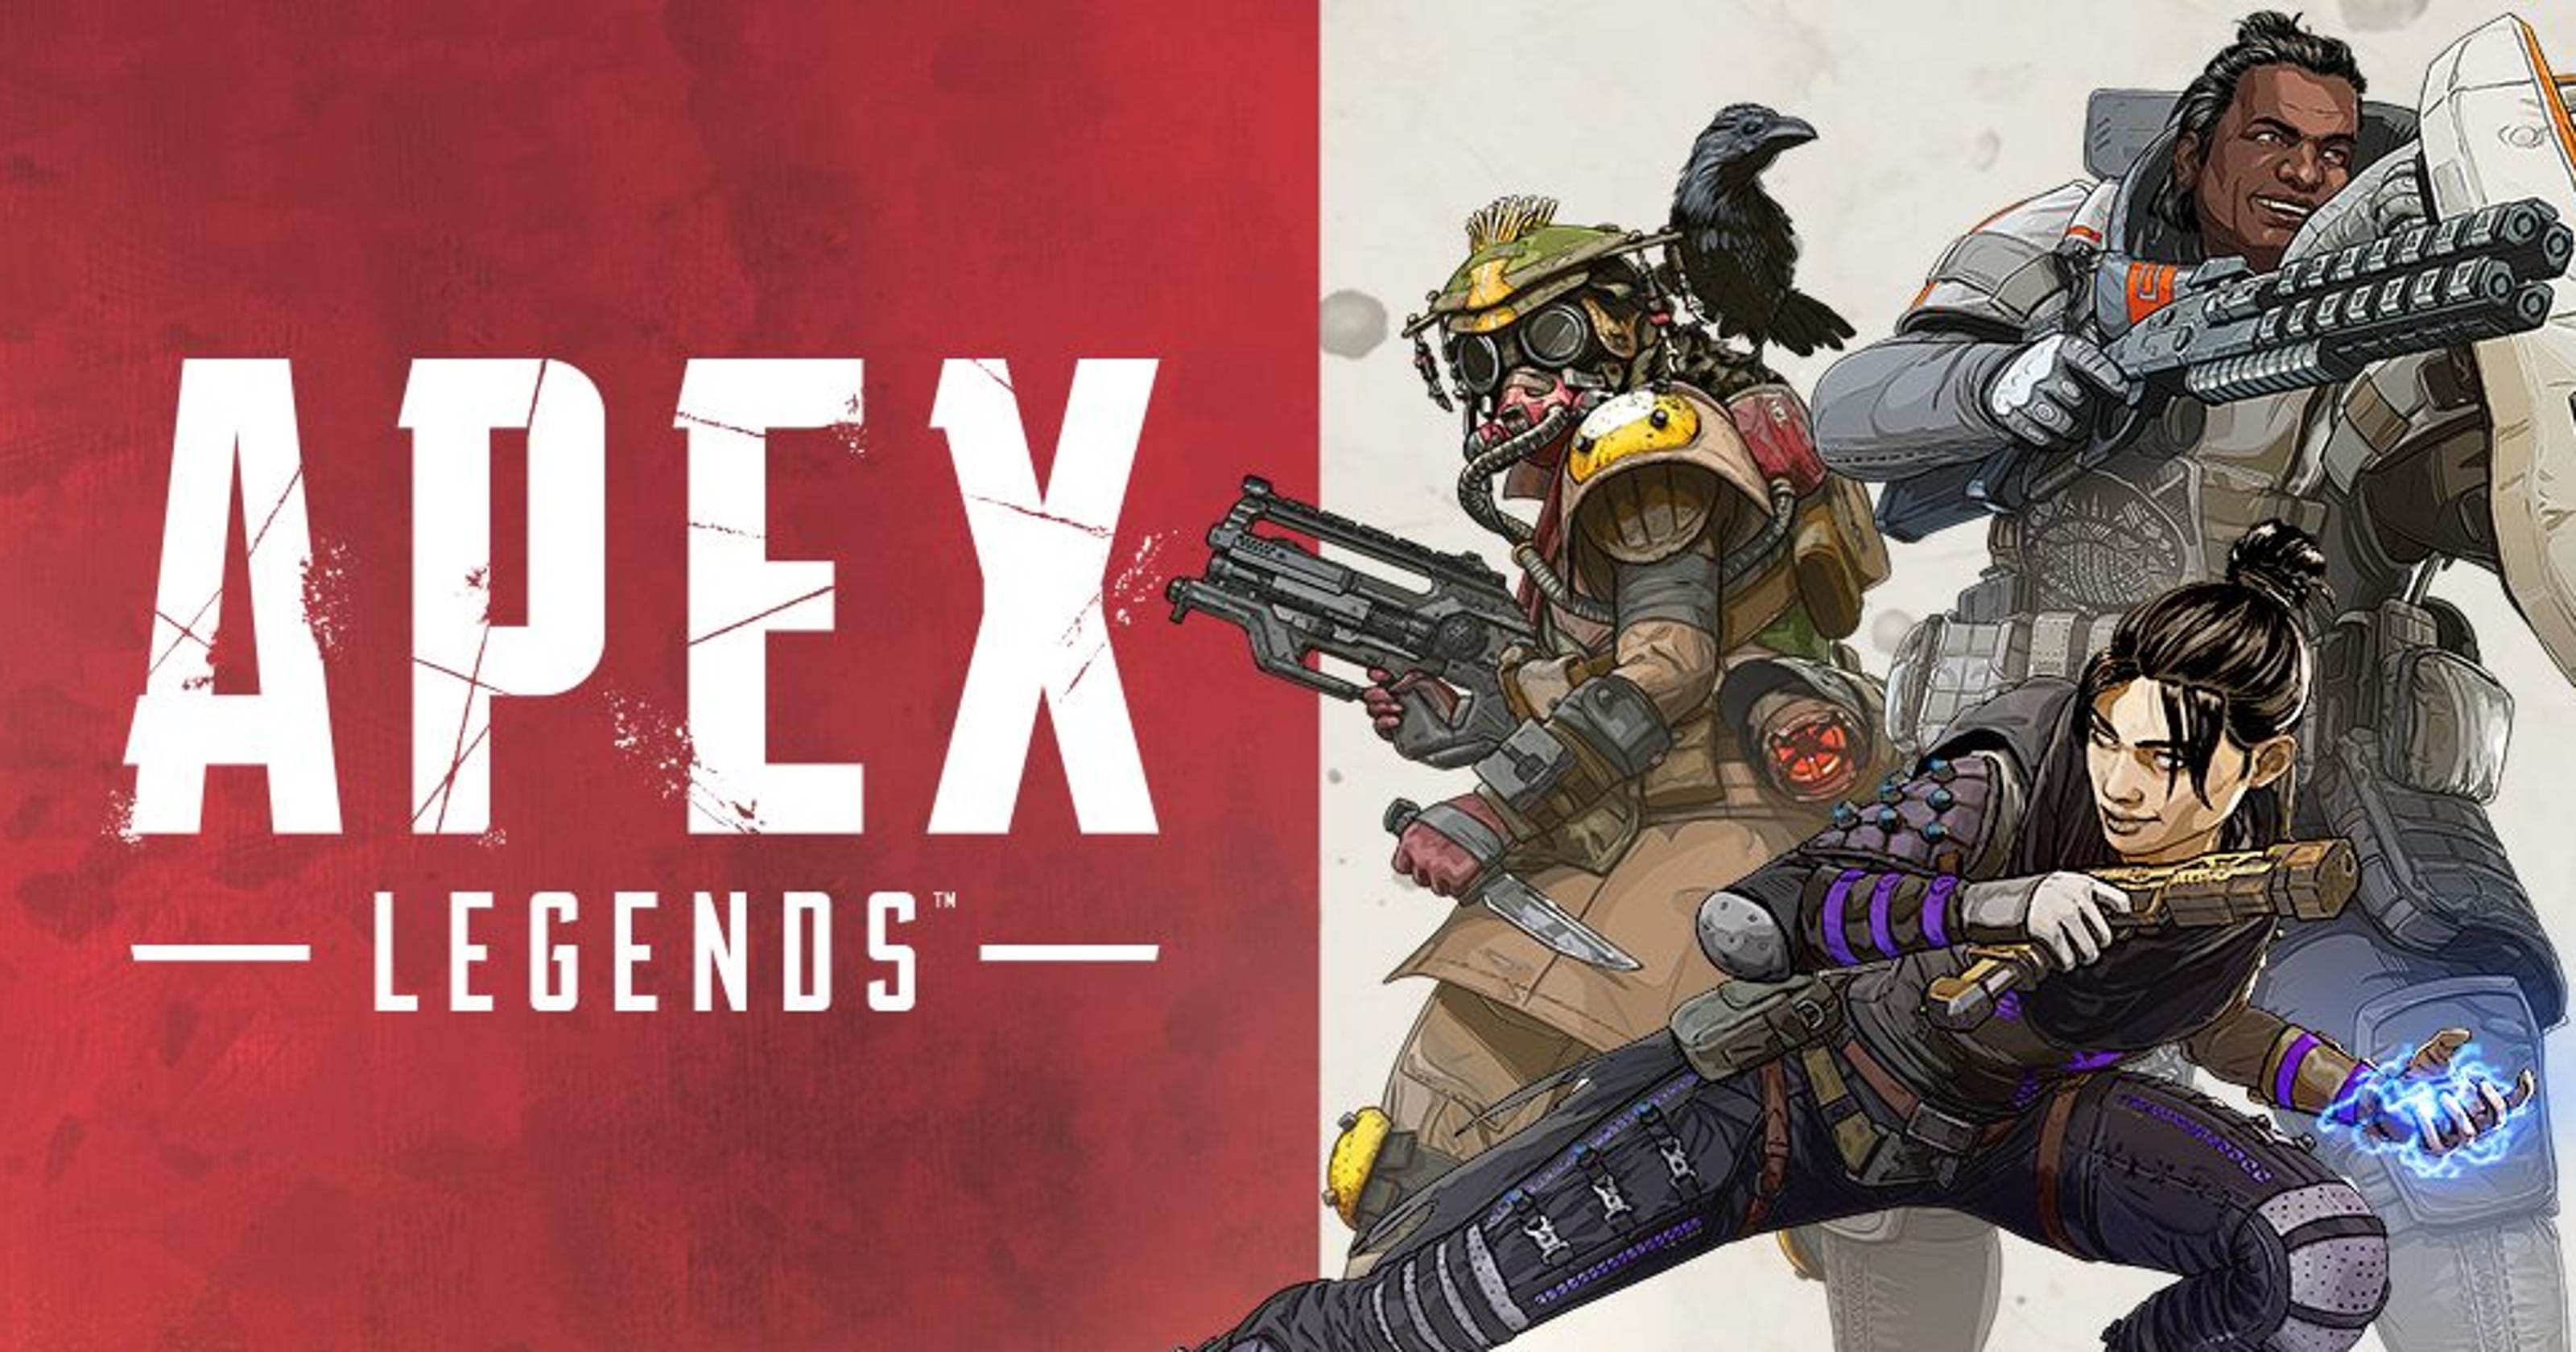 Apex Legends: A parents' guide to the new hot video game - 3024 x 1680 jpeg 484kB